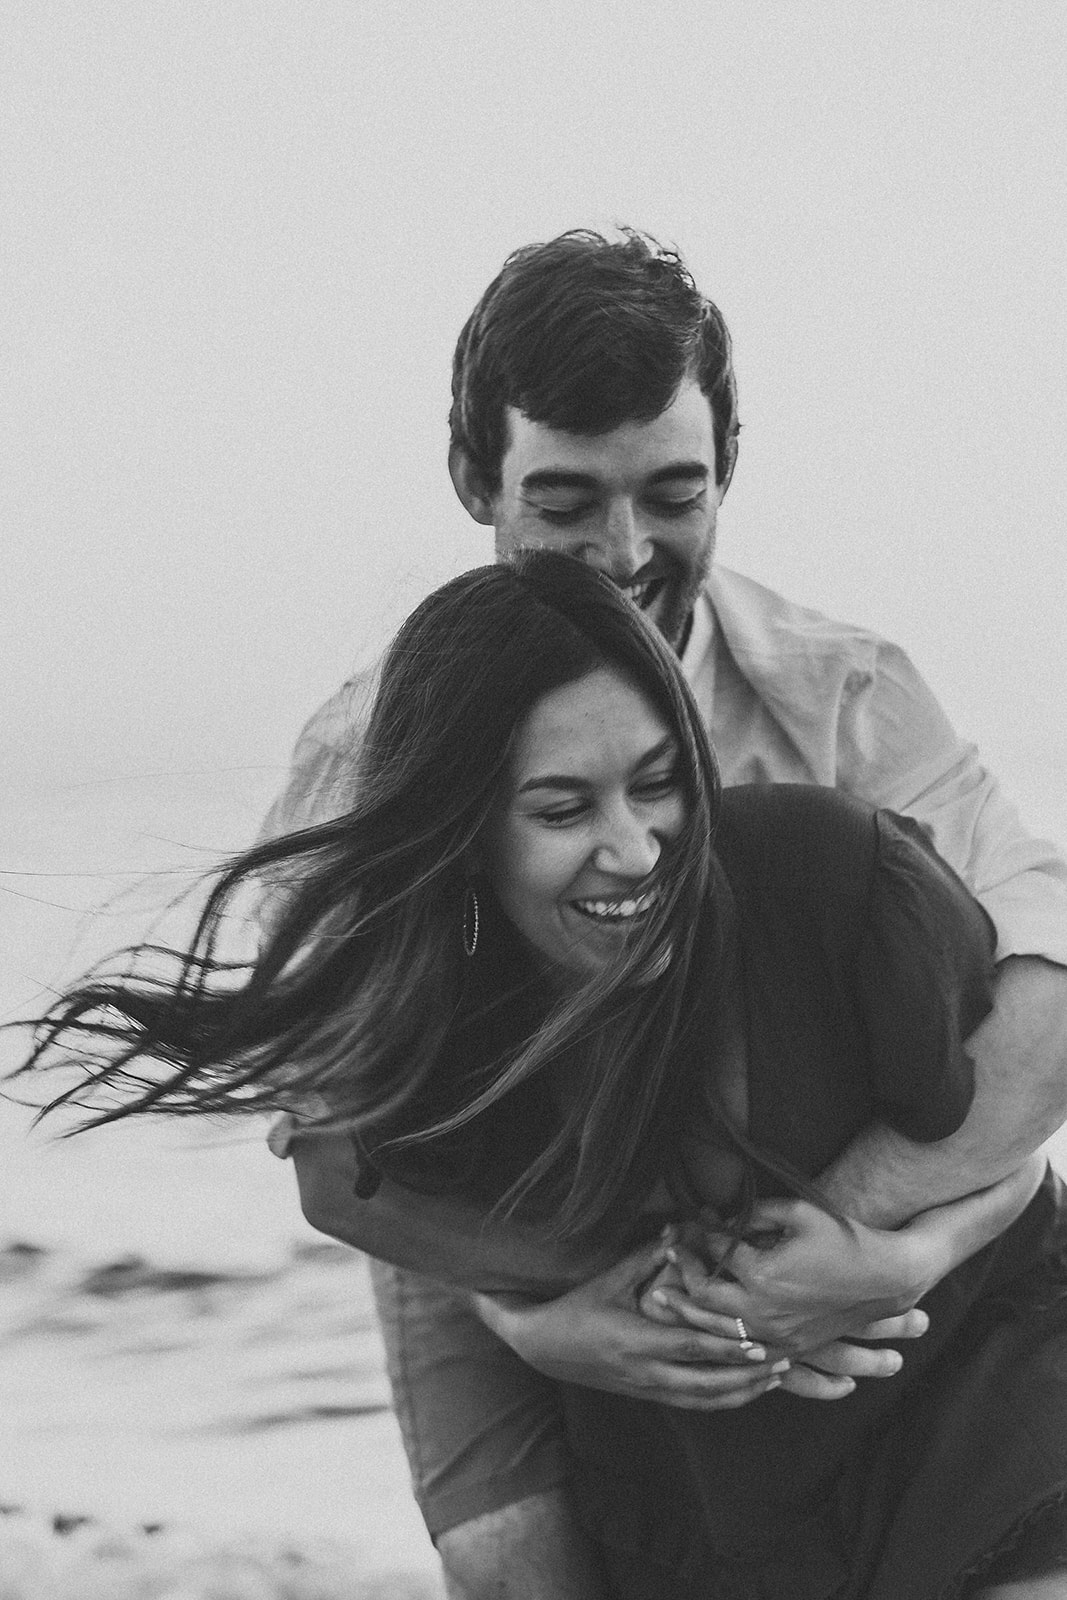 Oval Beach Engagement Session | Allie + Ryan